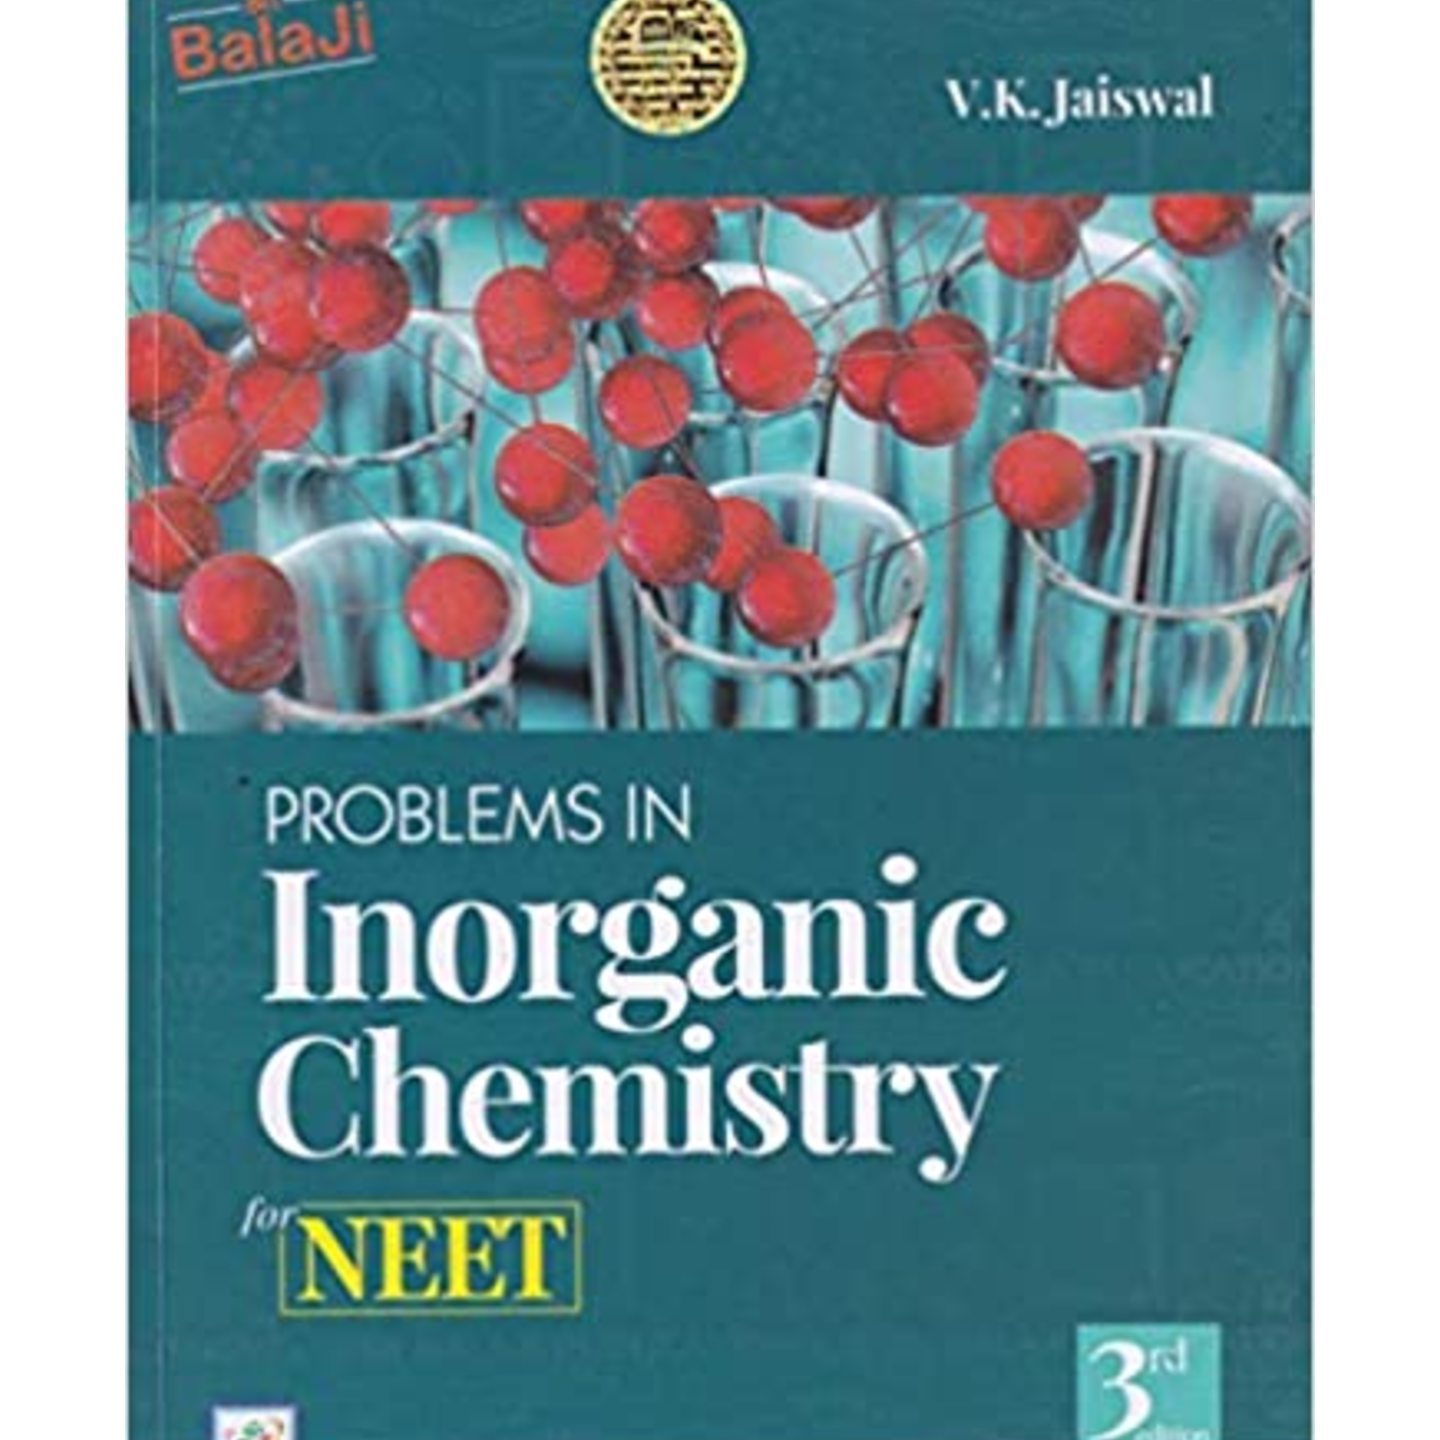 Problems in Inorganic Chemistry for NEET